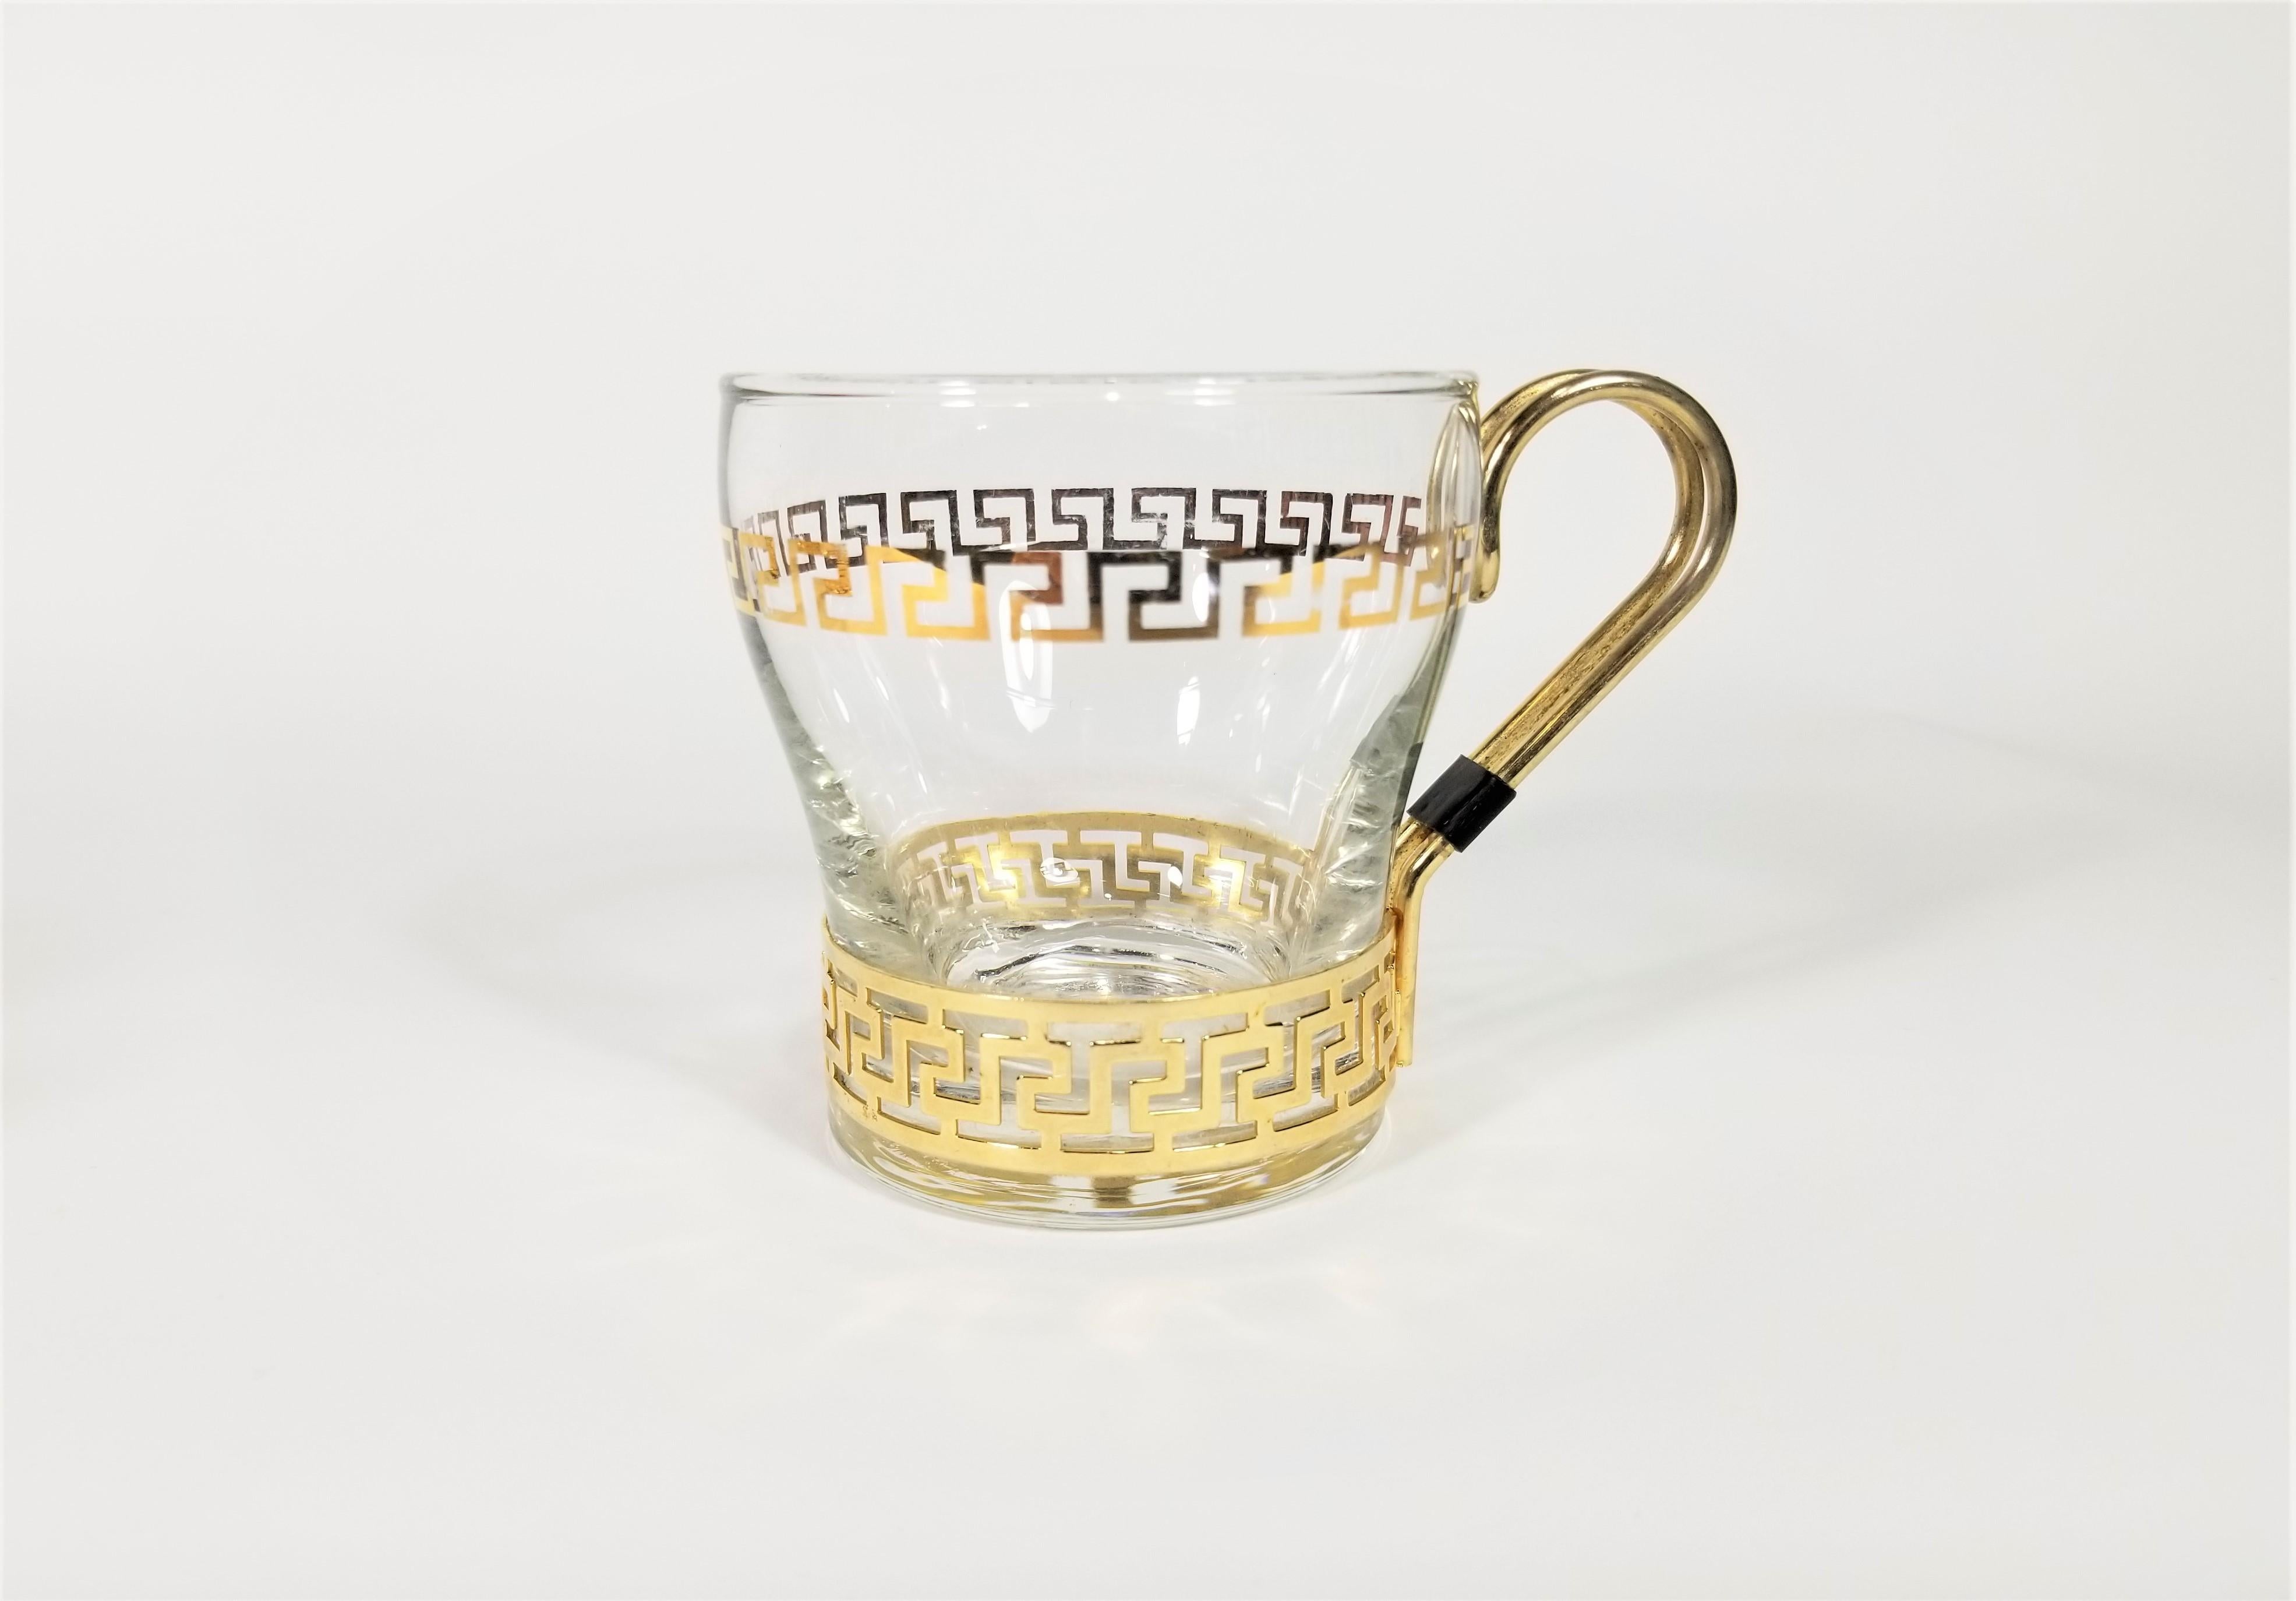 Libbey Greek Key Glassware with Gold Design Midcentury In Excellent Condition For Sale In New York, NY